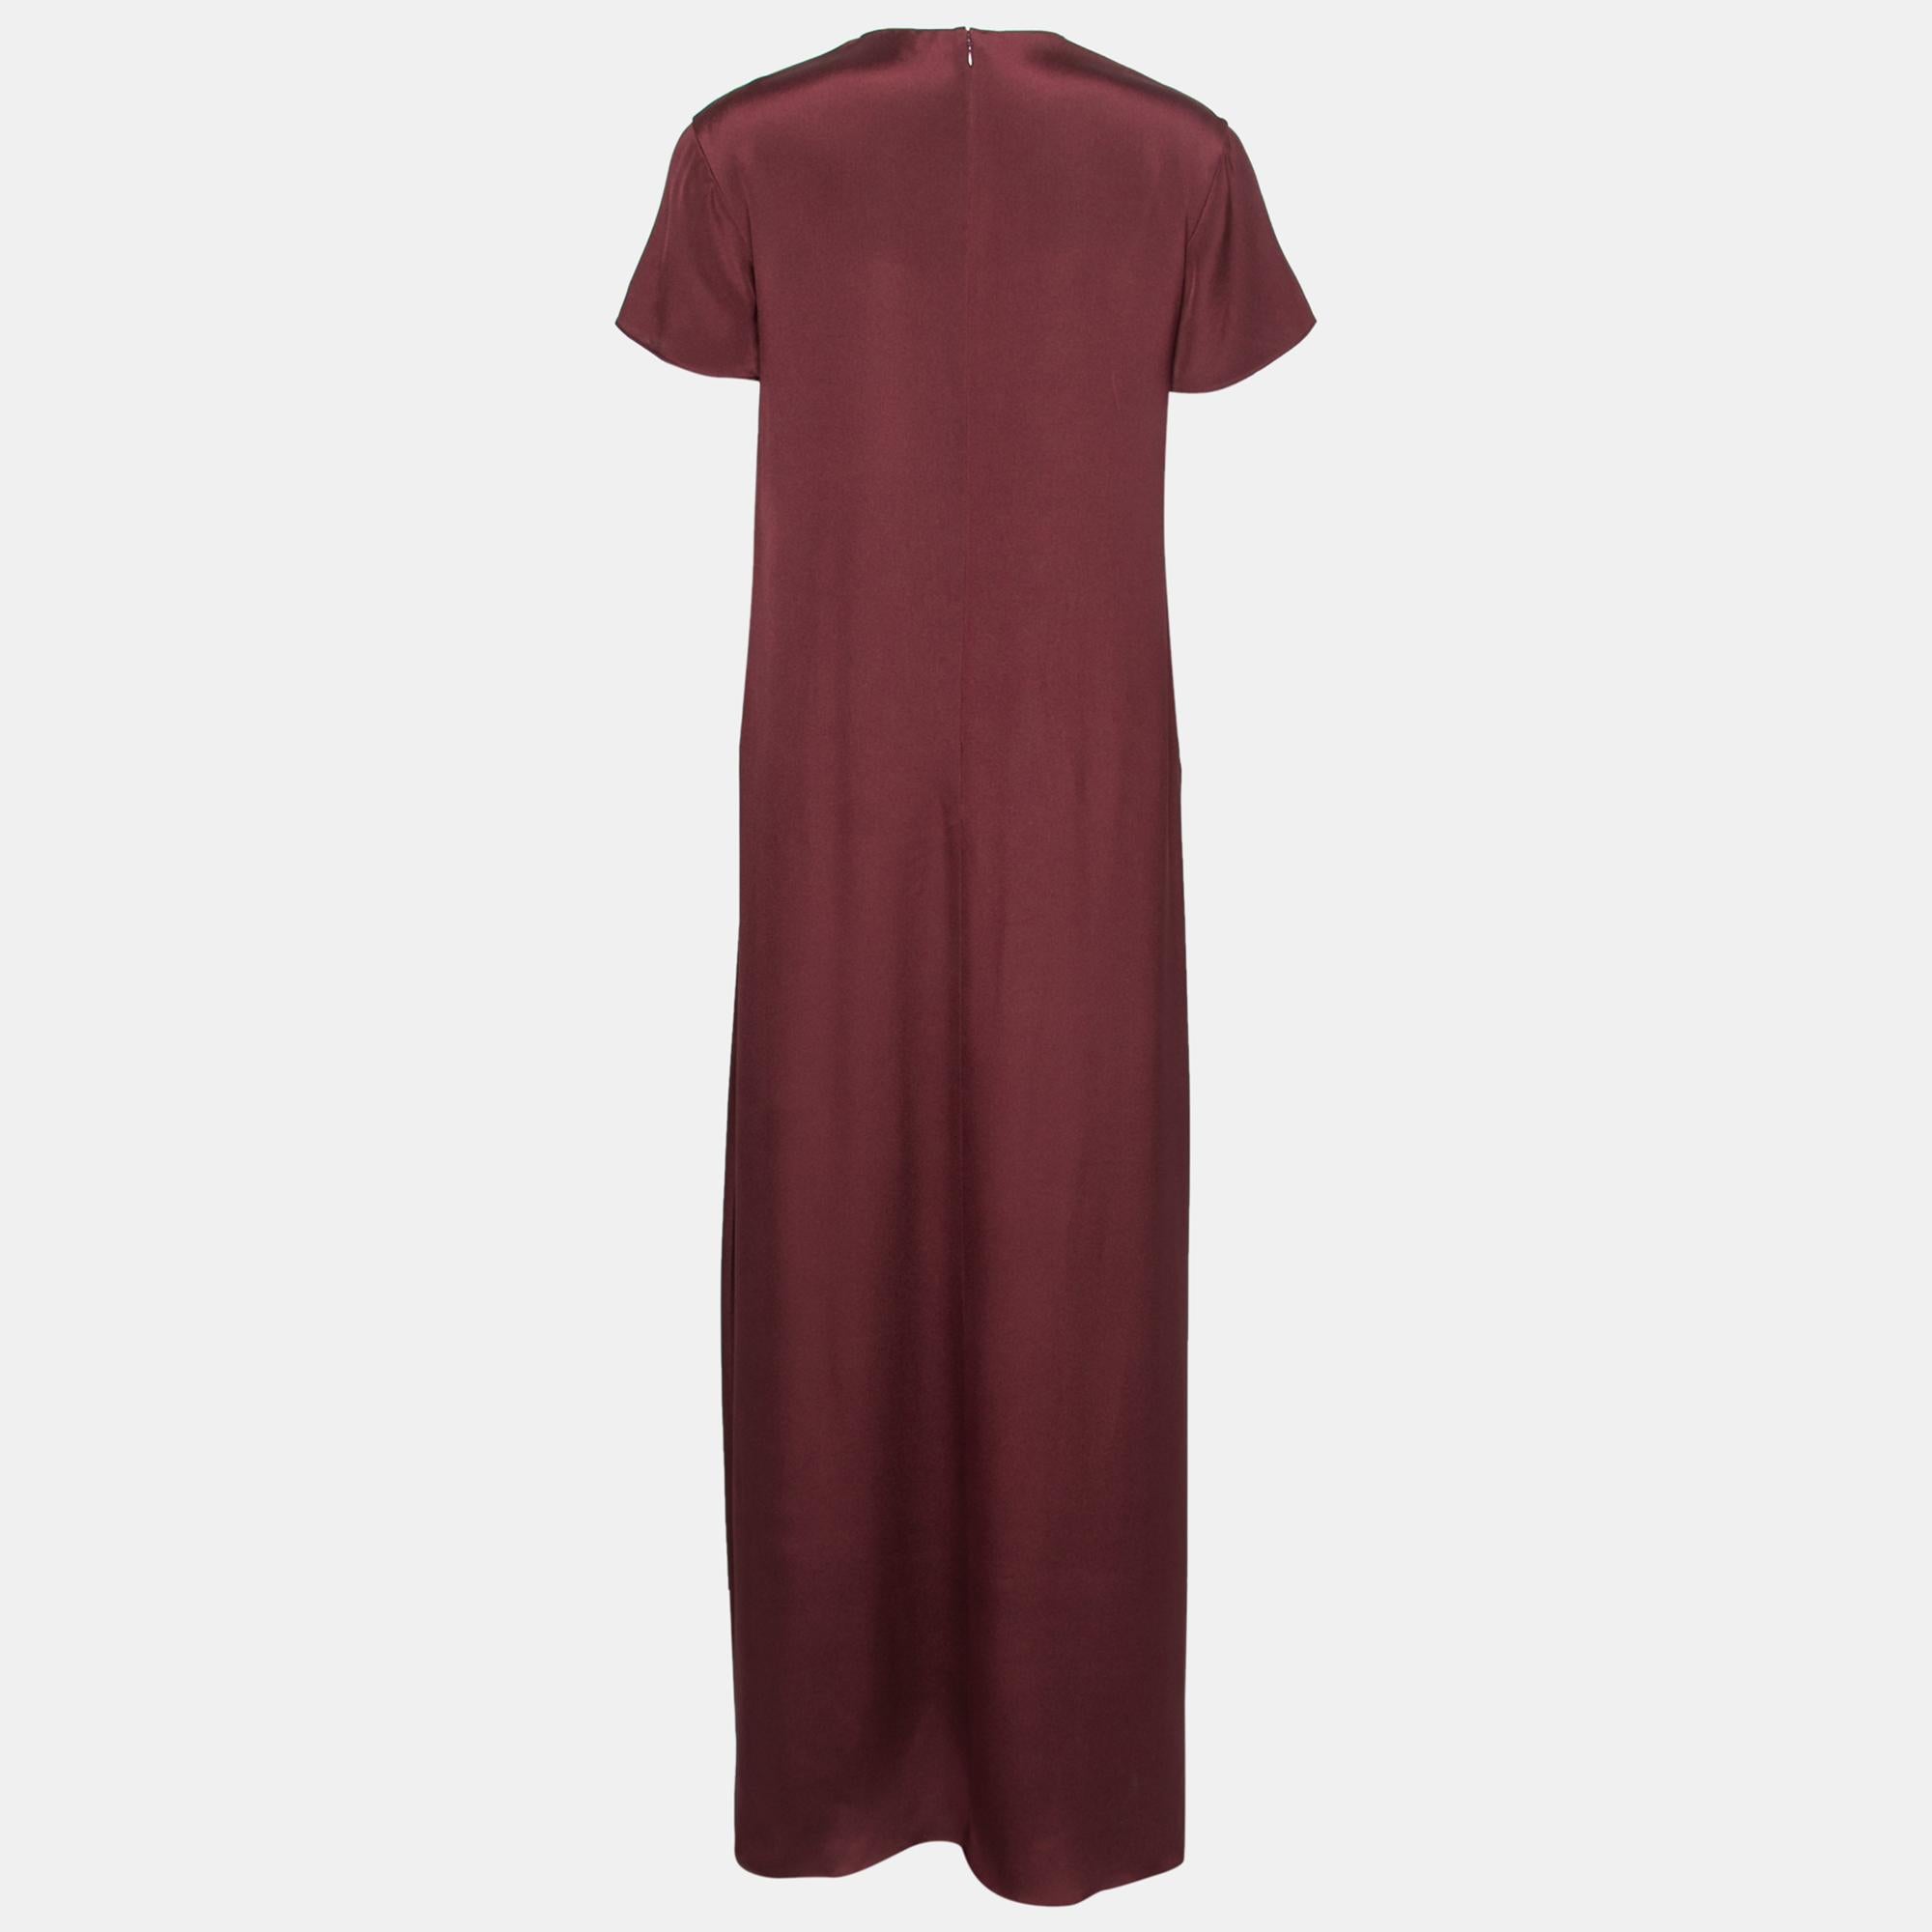 A chic maxi dress that you can easily slip into is a must-have for your wardrobe. Thanks to this gorgeous Valentino maxi dress, you don't have to wait any longer. Cut from burgundy-pink silk crepe fabric, this dress is accentuated with paneled